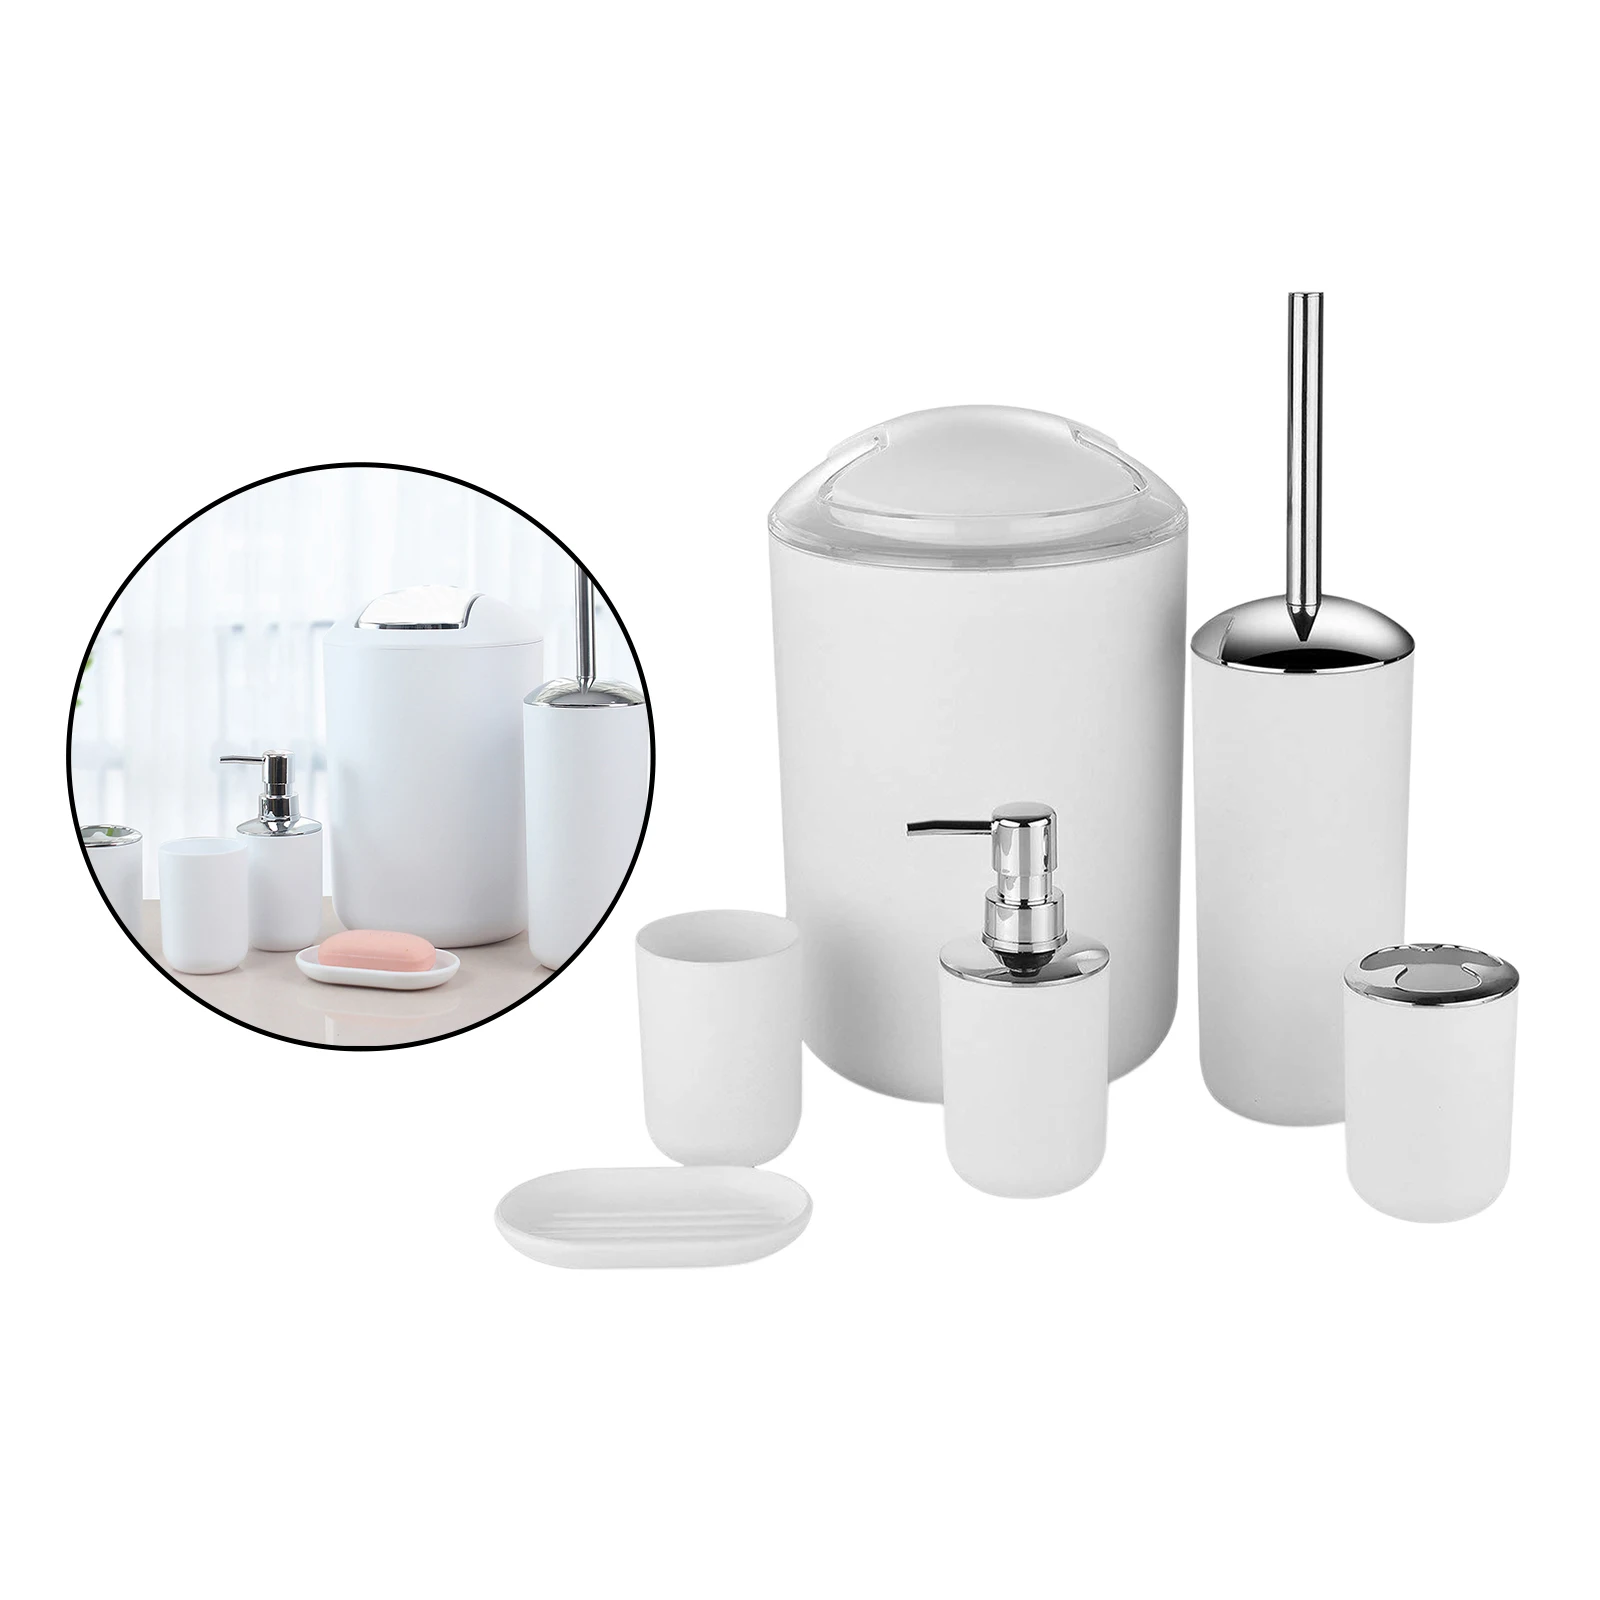 Bathroom Accessories Set,6 Pcs Gift Set Toothbrush Holder,Toothbrush Cup,Soap Dispenser,Soap Dish,Toilet Brush Holder,Trash Can